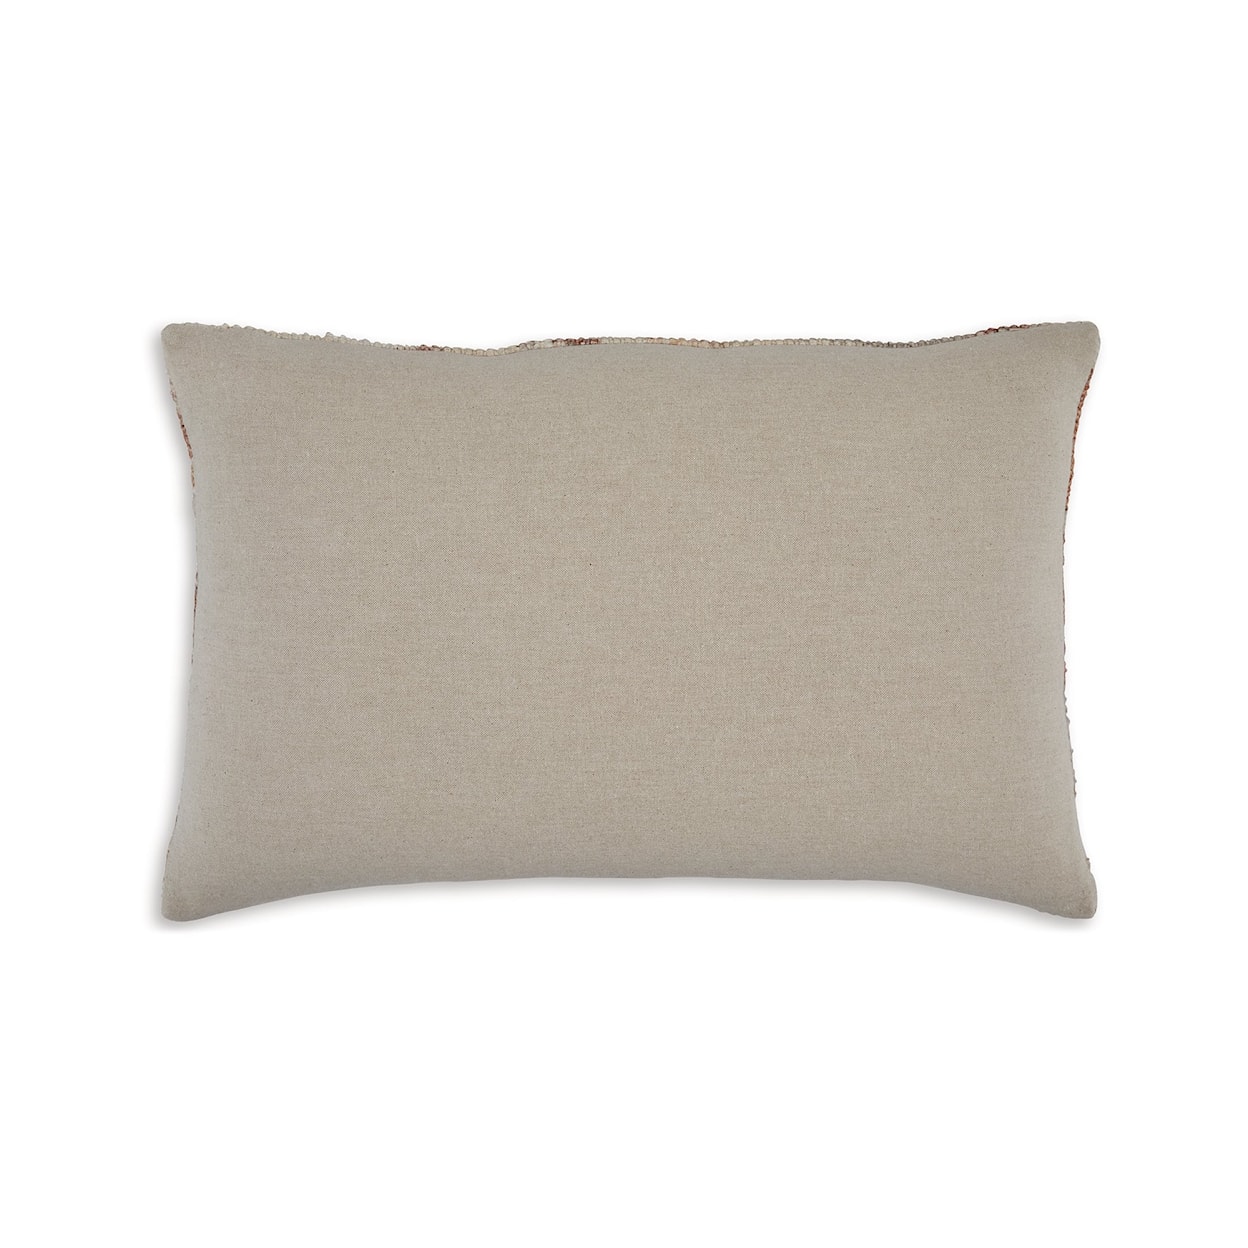 Signature Design by Ashley Aprover Pillow (Set of 4)